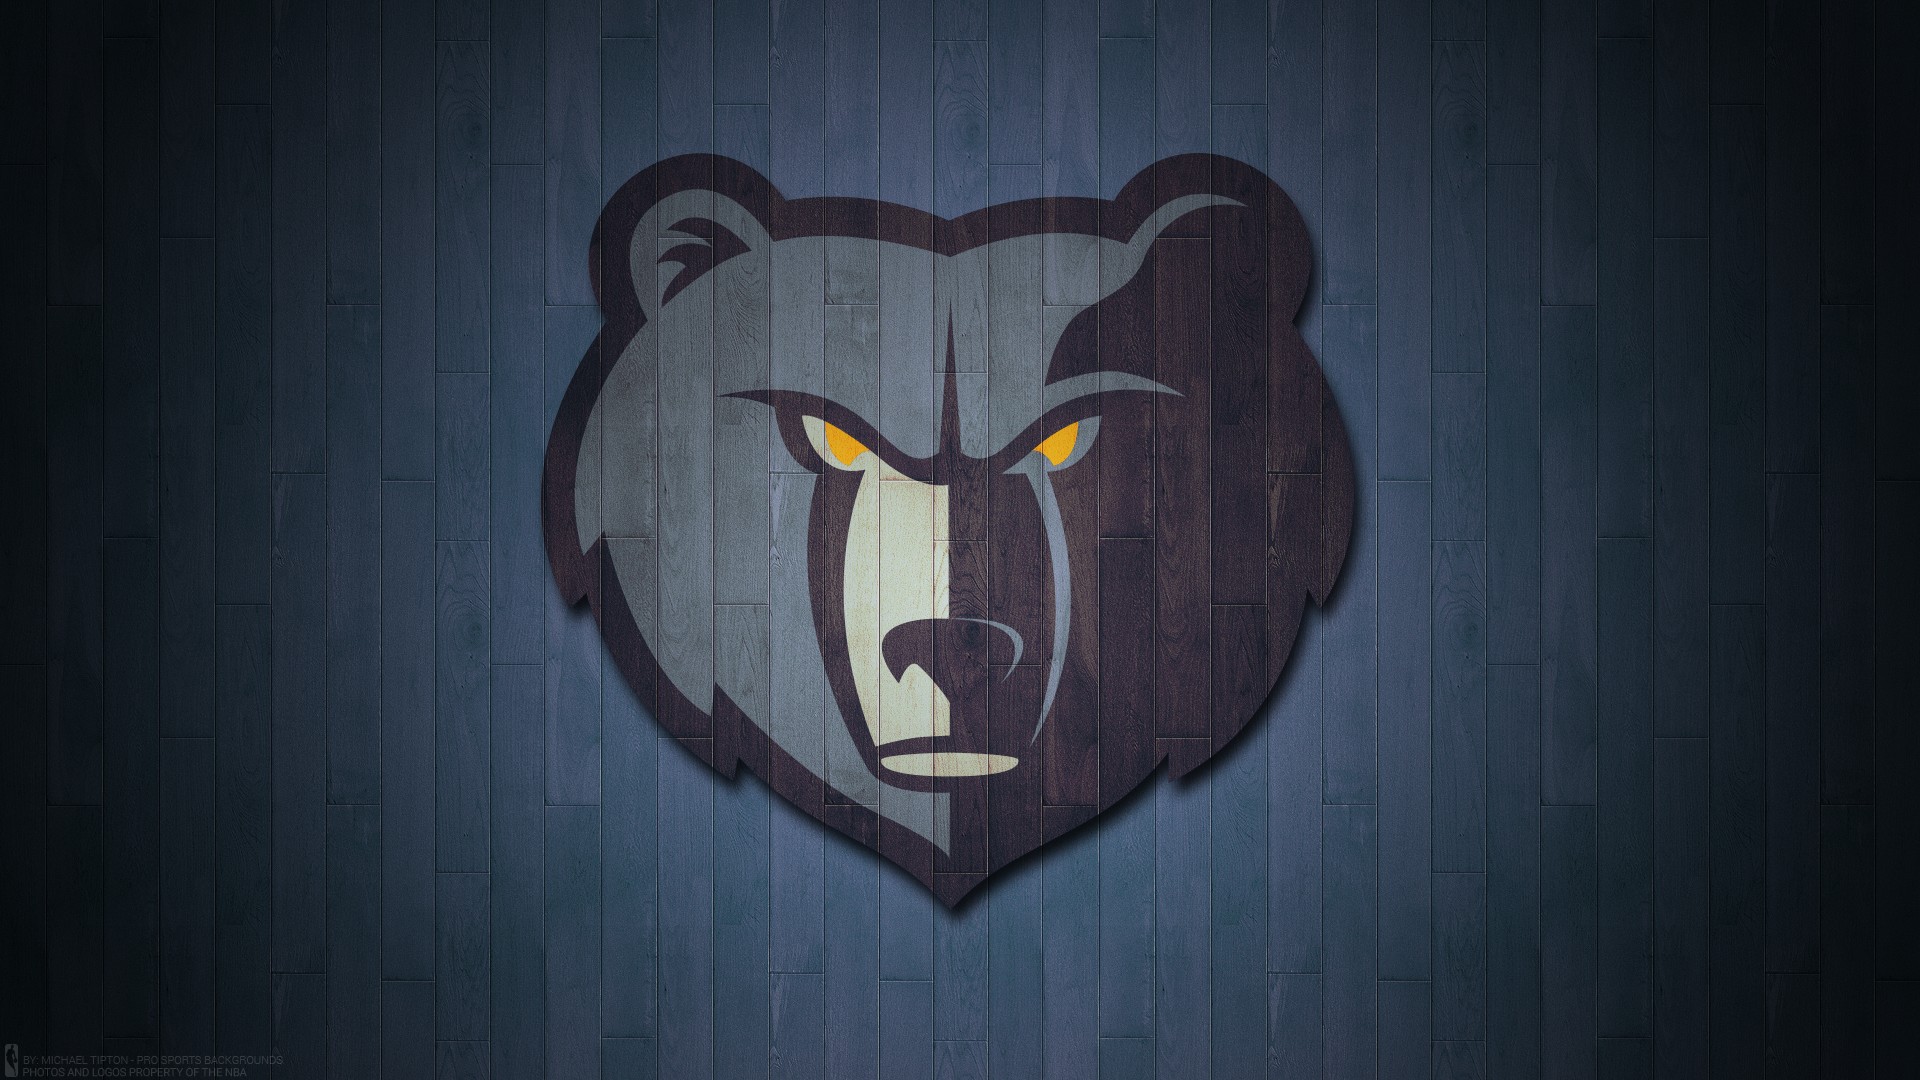 Windows Wallpaper Memphis Grizzlies with high-resolution 1920x1080 pixel. You can use this wallpaper for your Desktop Computer Backgrounds, Windows or Mac Screensavers, iPhone Lock screen, Tablet or Android and another Mobile Phone device